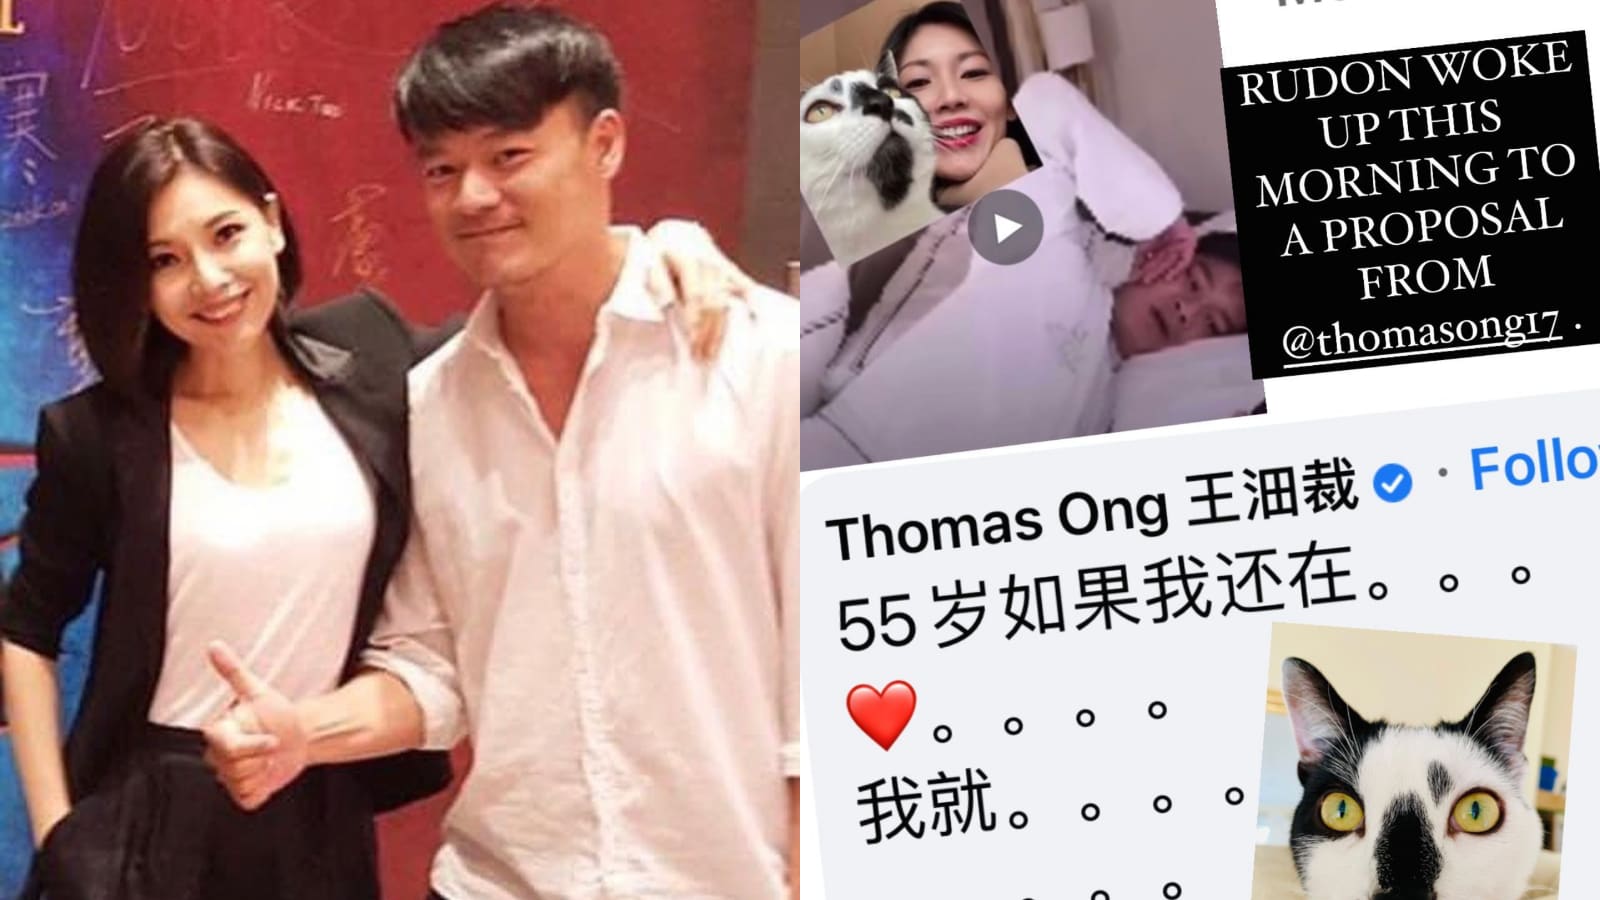 “Singapore’s Most Eligible Bachelor” Thomas Ong ‘Proposes’ To His Ex-Girlfriend Sharon Au…’s Cat